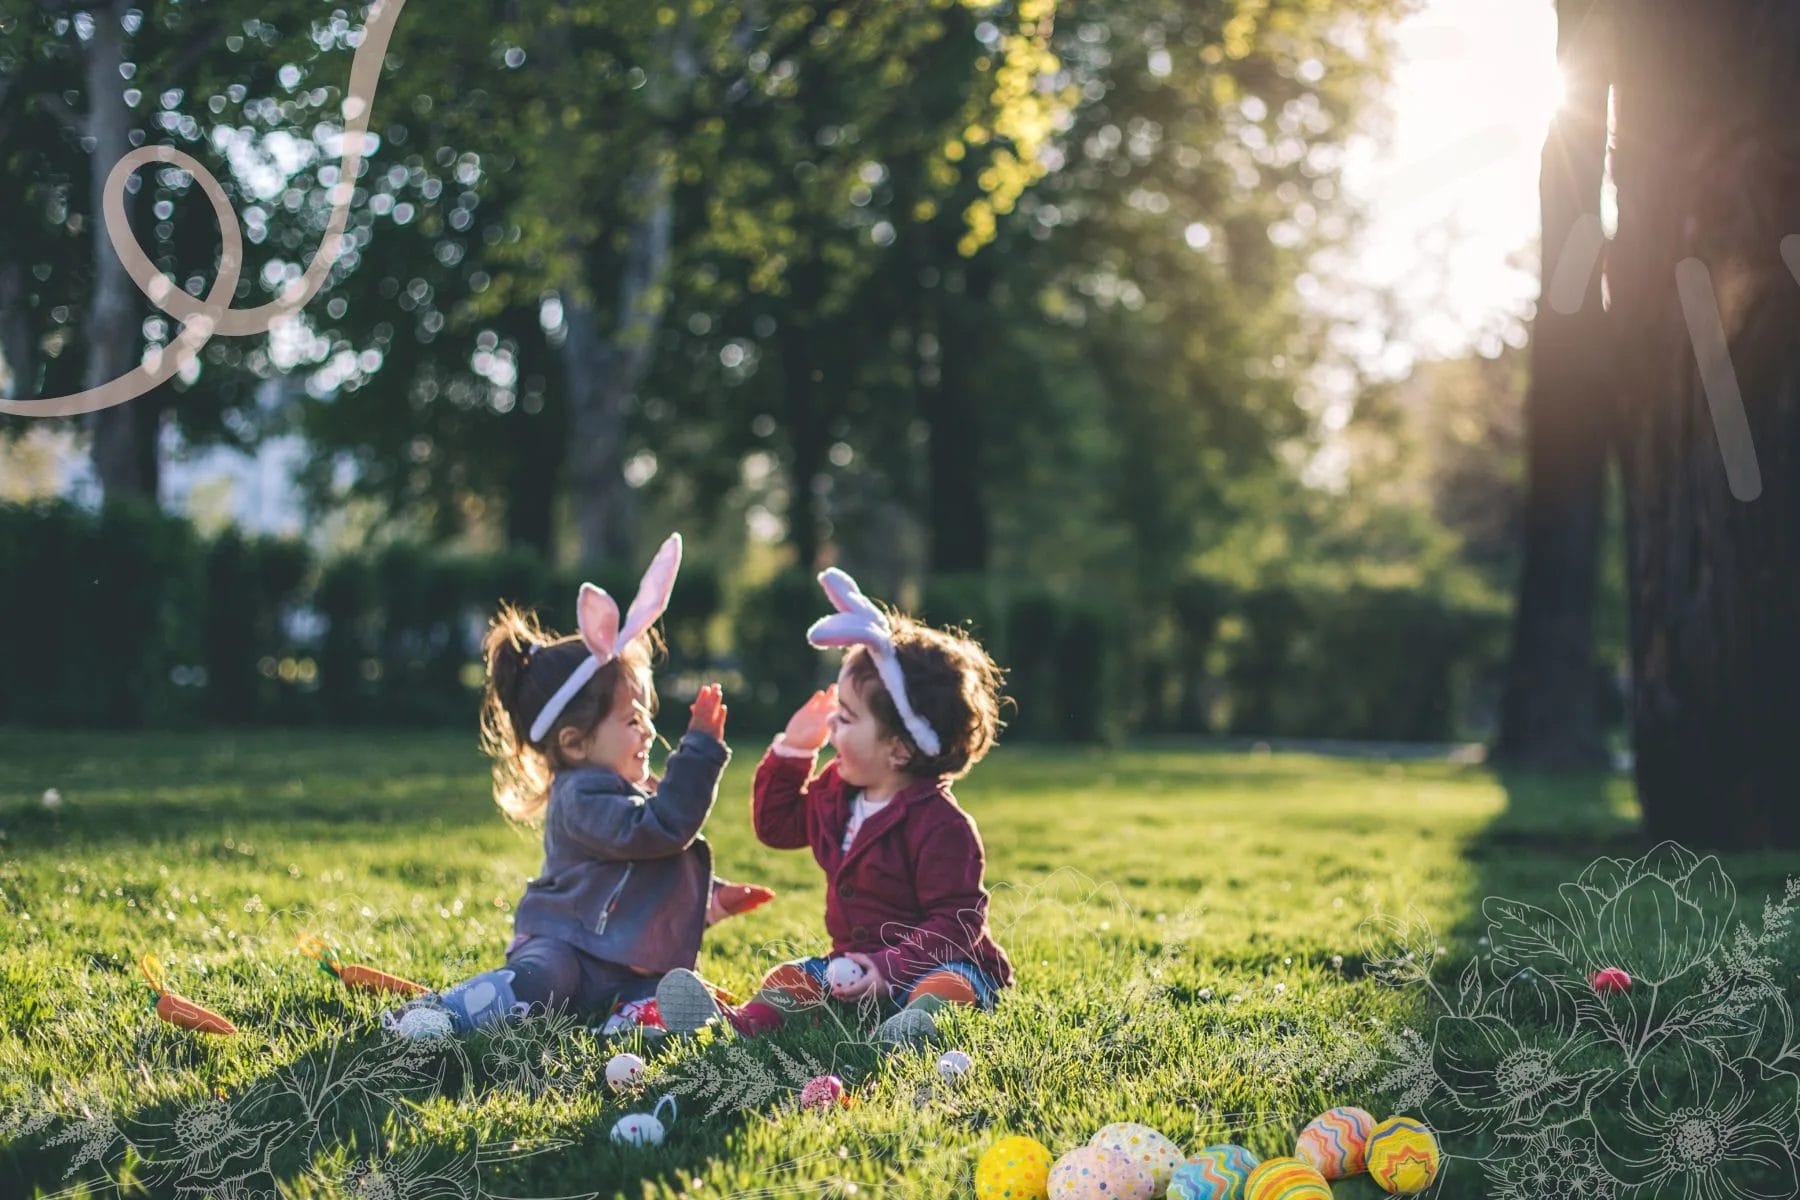 Two toddlers sitting on a grassy field with Easter eggs